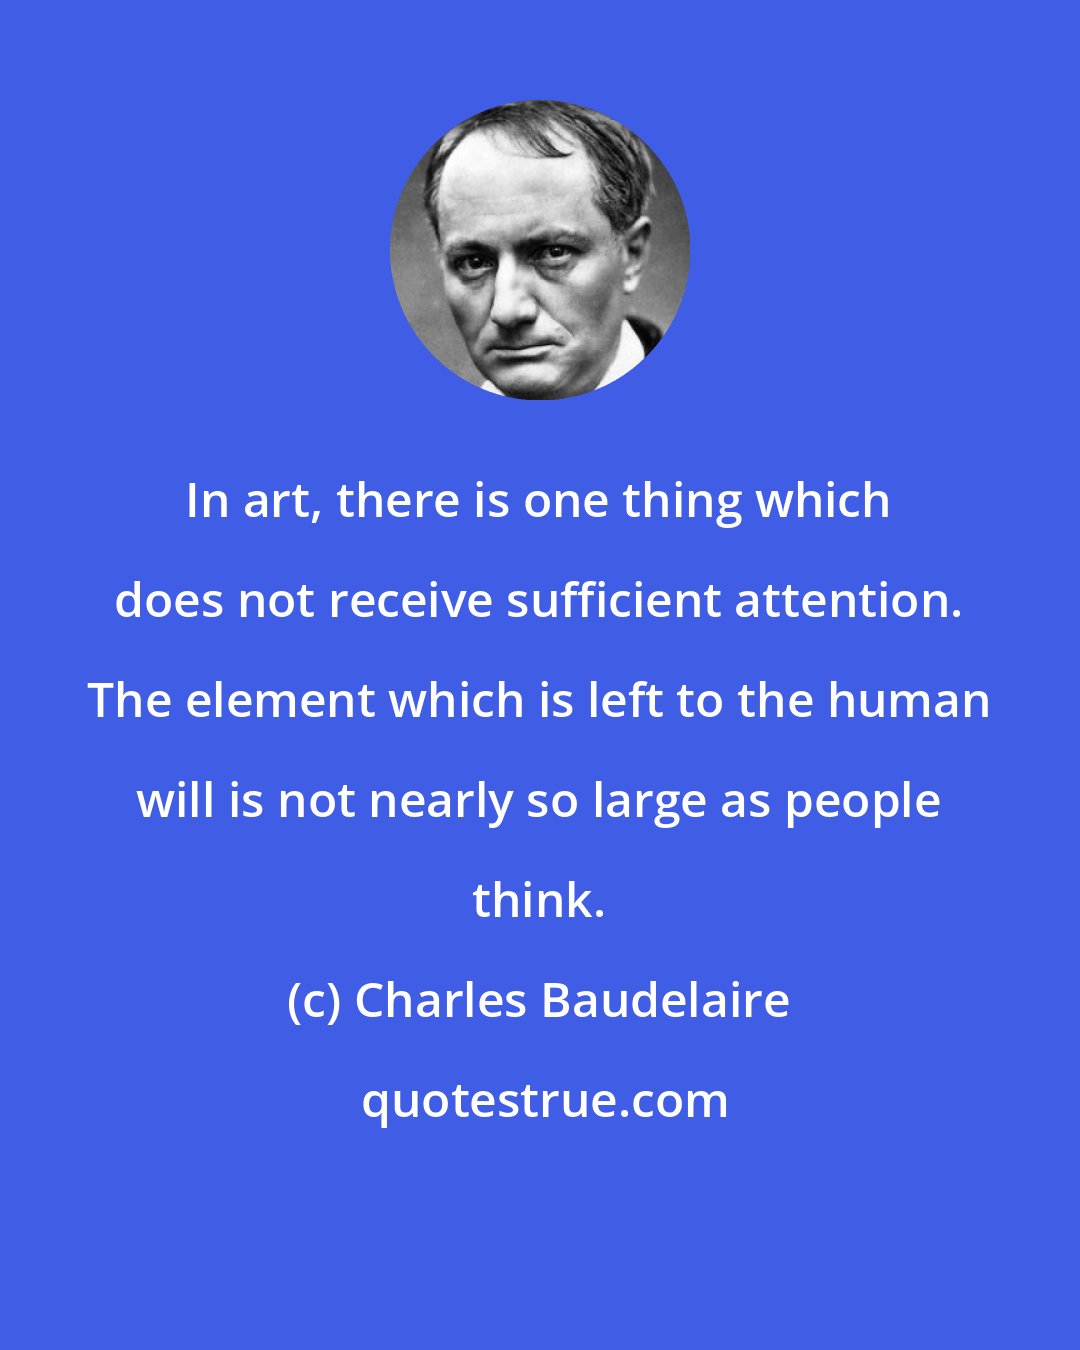 Charles Baudelaire: In art, there is one thing which does not receive sufficient attention. The element which is left to the human will is not nearly so large as people think.